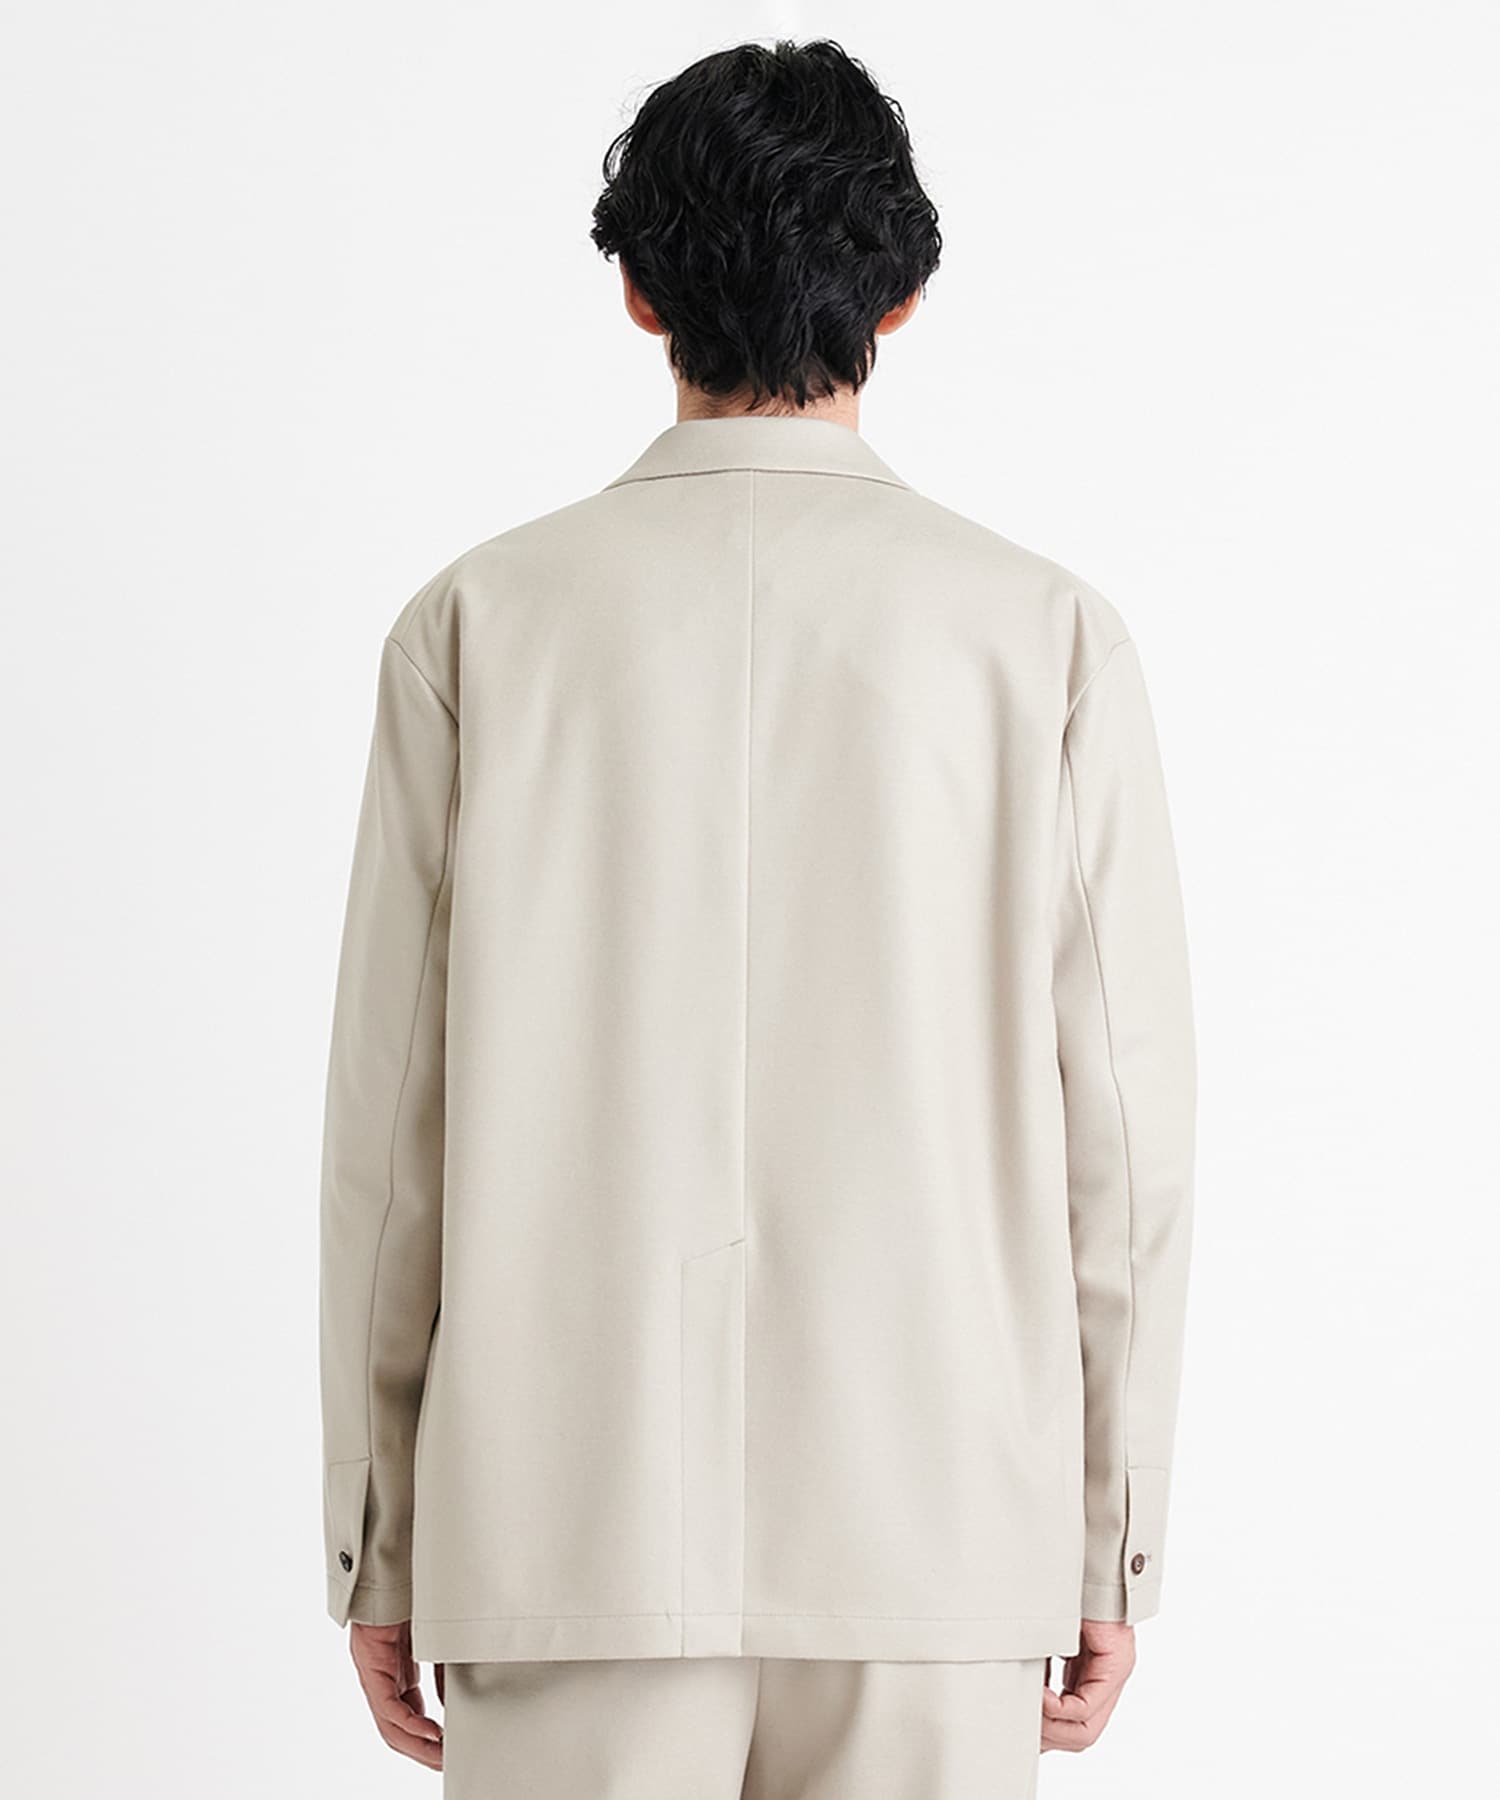 Flanne Lana Cashmere Touch Box Jacket THE TOKYO